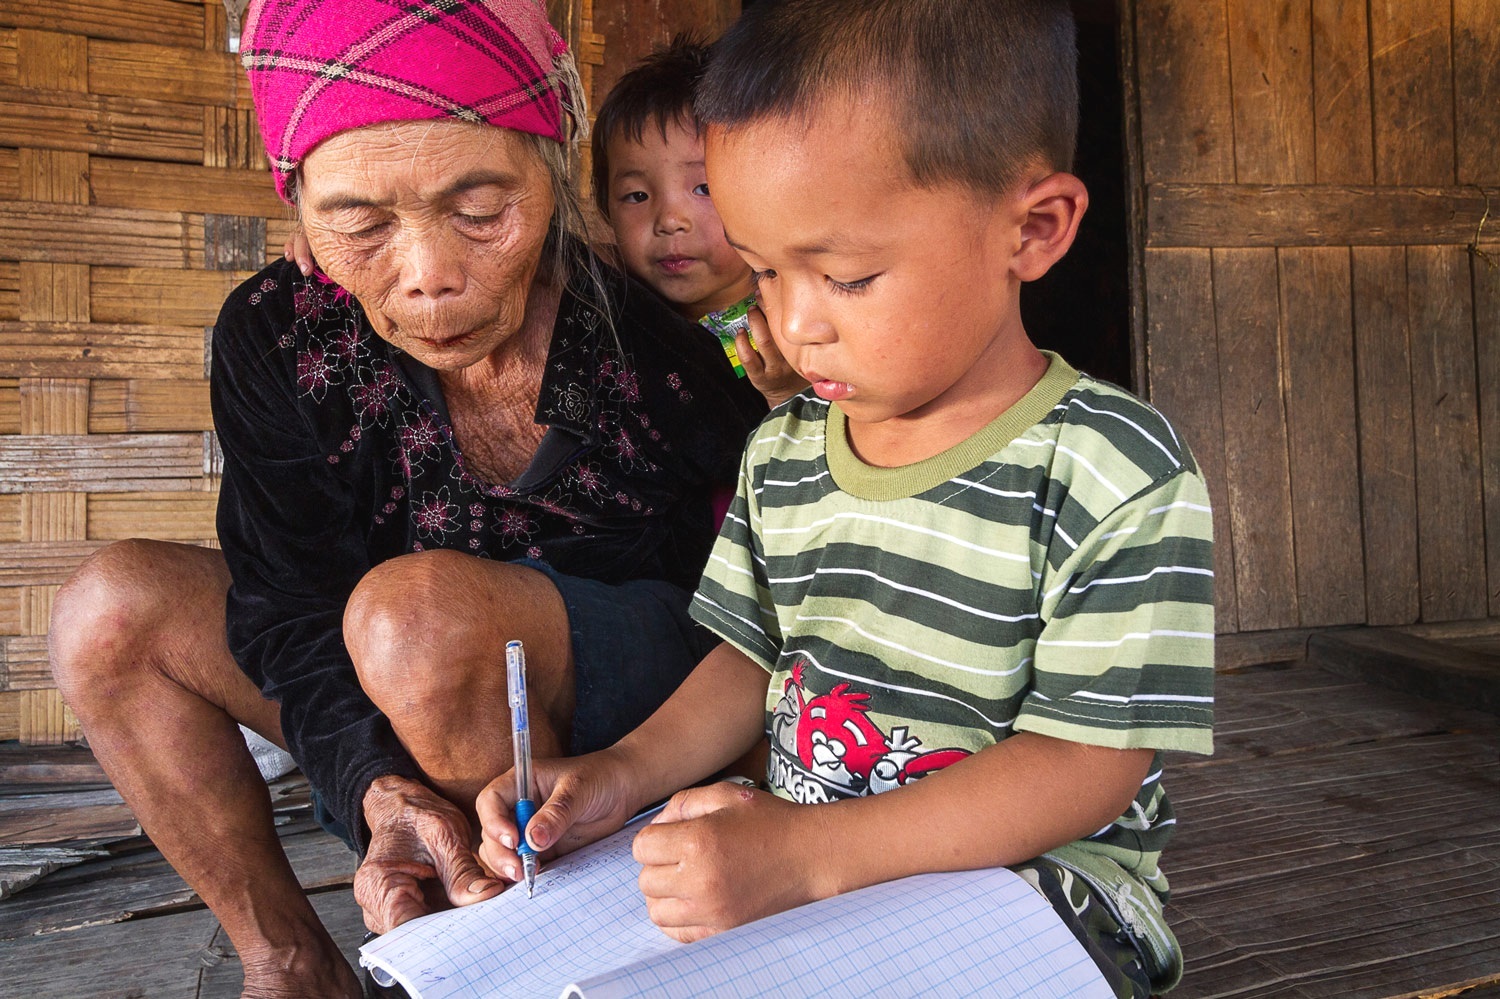  OPEN THIS PUBLICATION  UNICEF LAOS: SA PAE'S STORY  